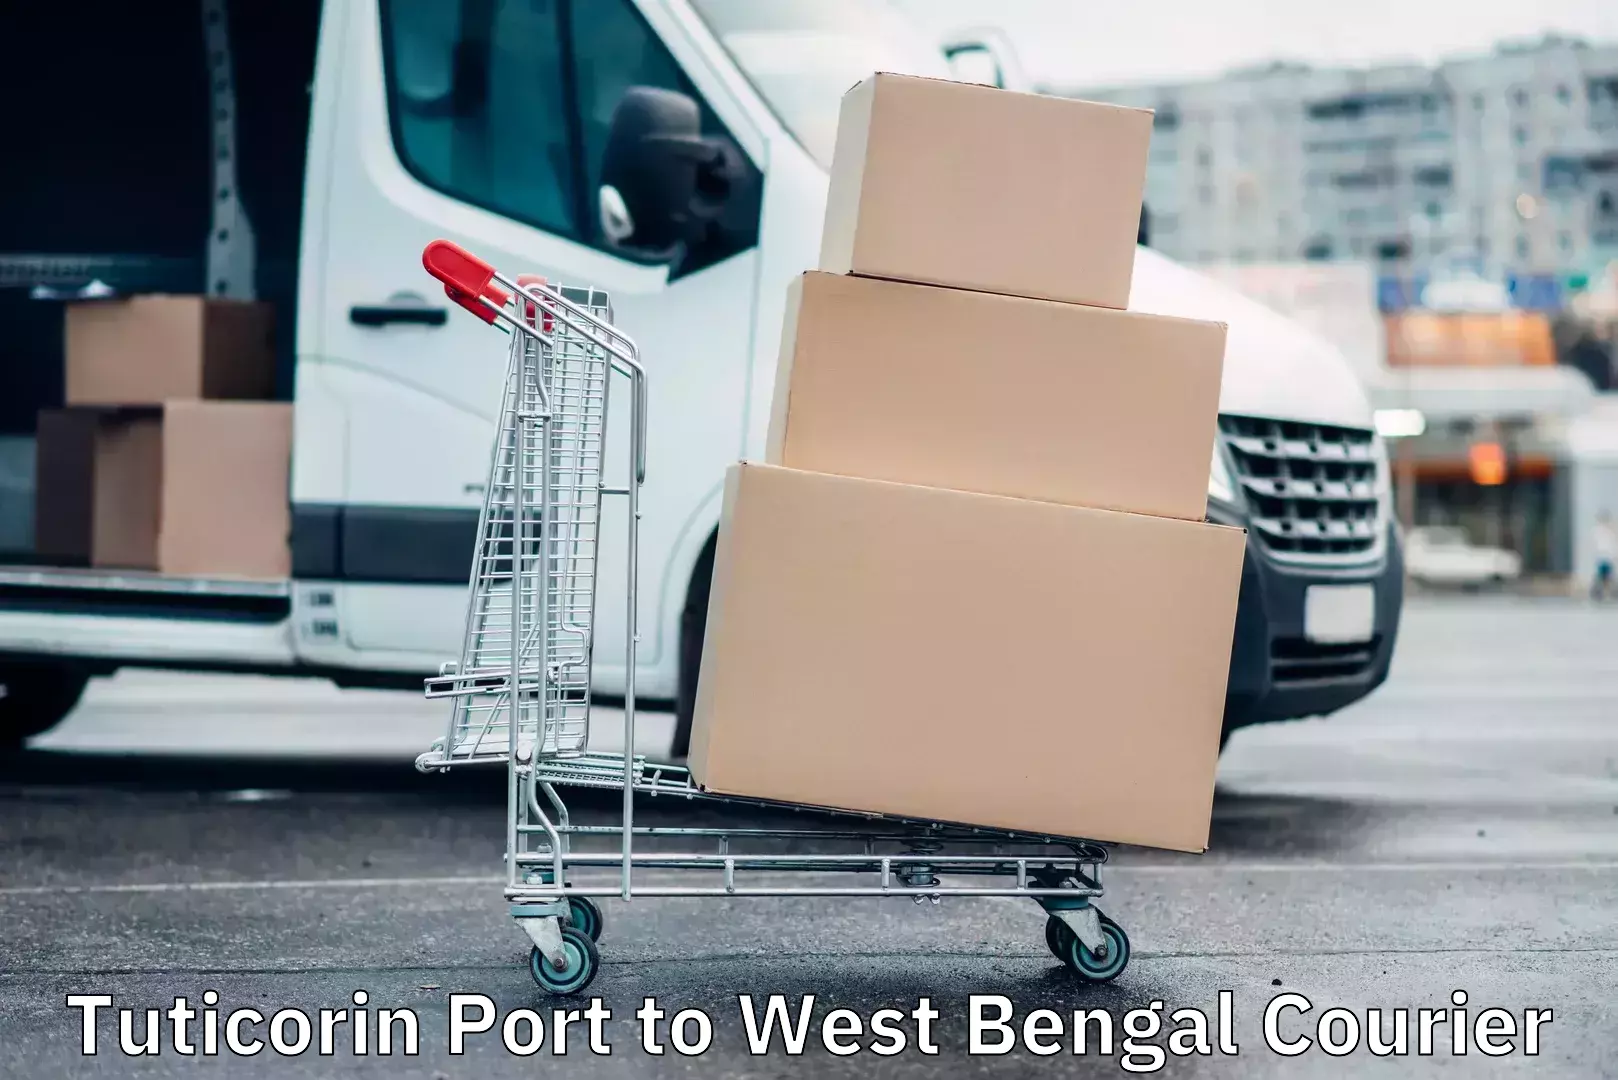 Integrated shipping systems Tuticorin Port to West Bengal